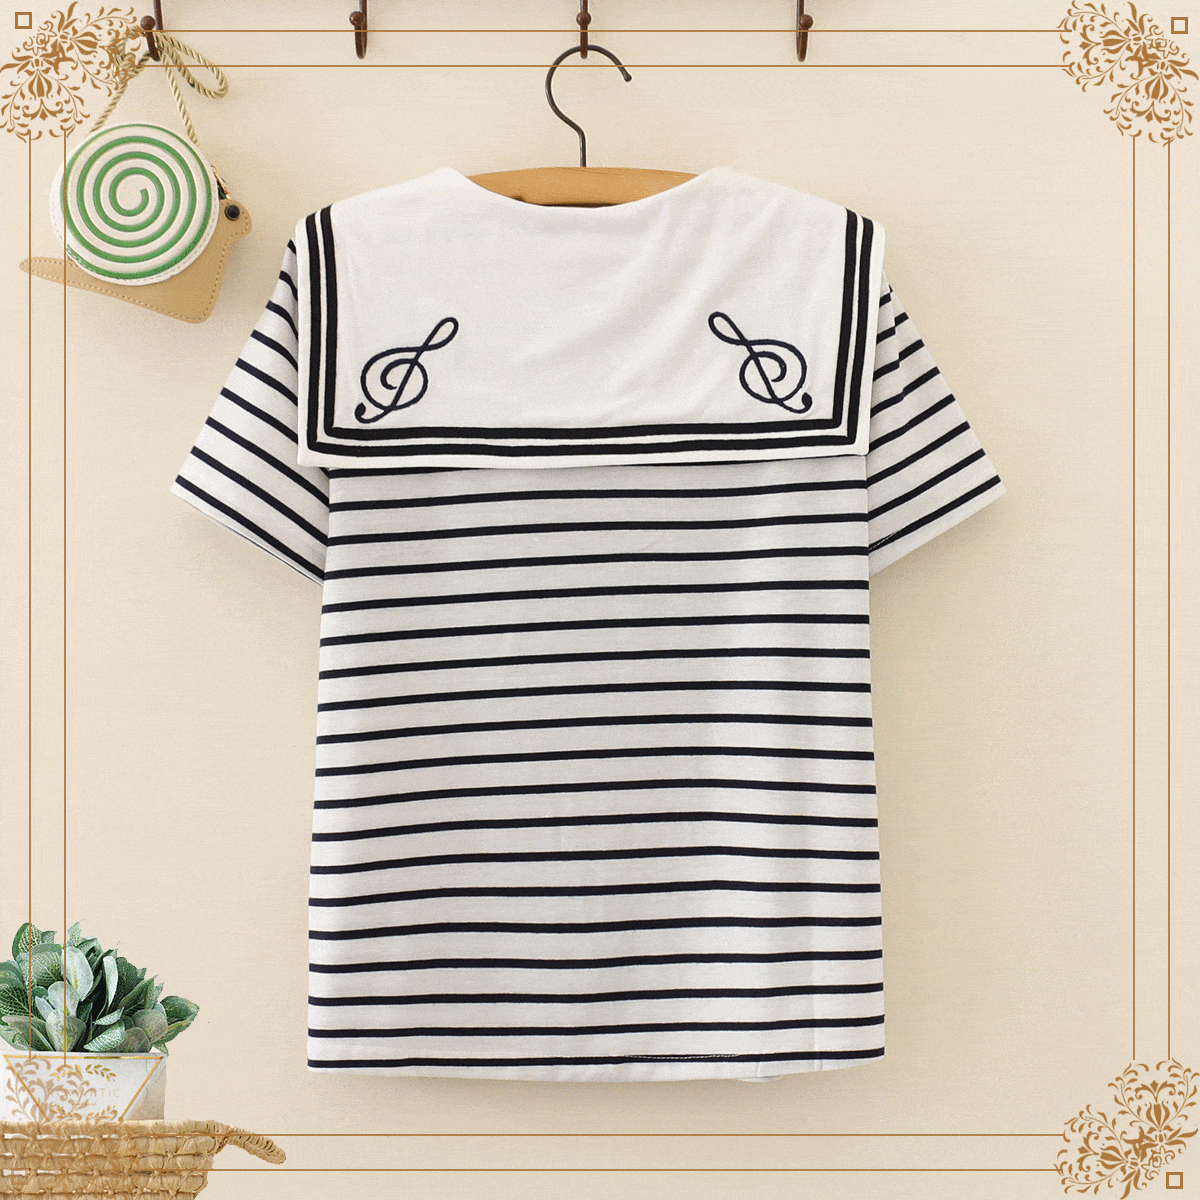 Kawaiifashion One Size Women's Sweet Contrast Color Striped Sailor Collar Note Embroidered Tees